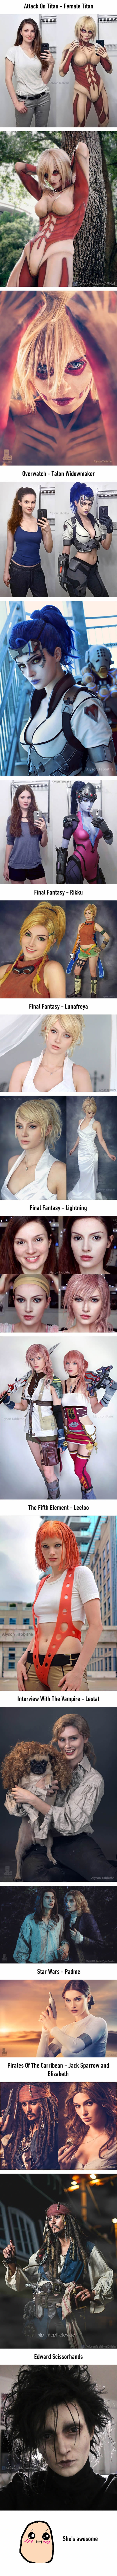 This girl's cosplays are spot-on